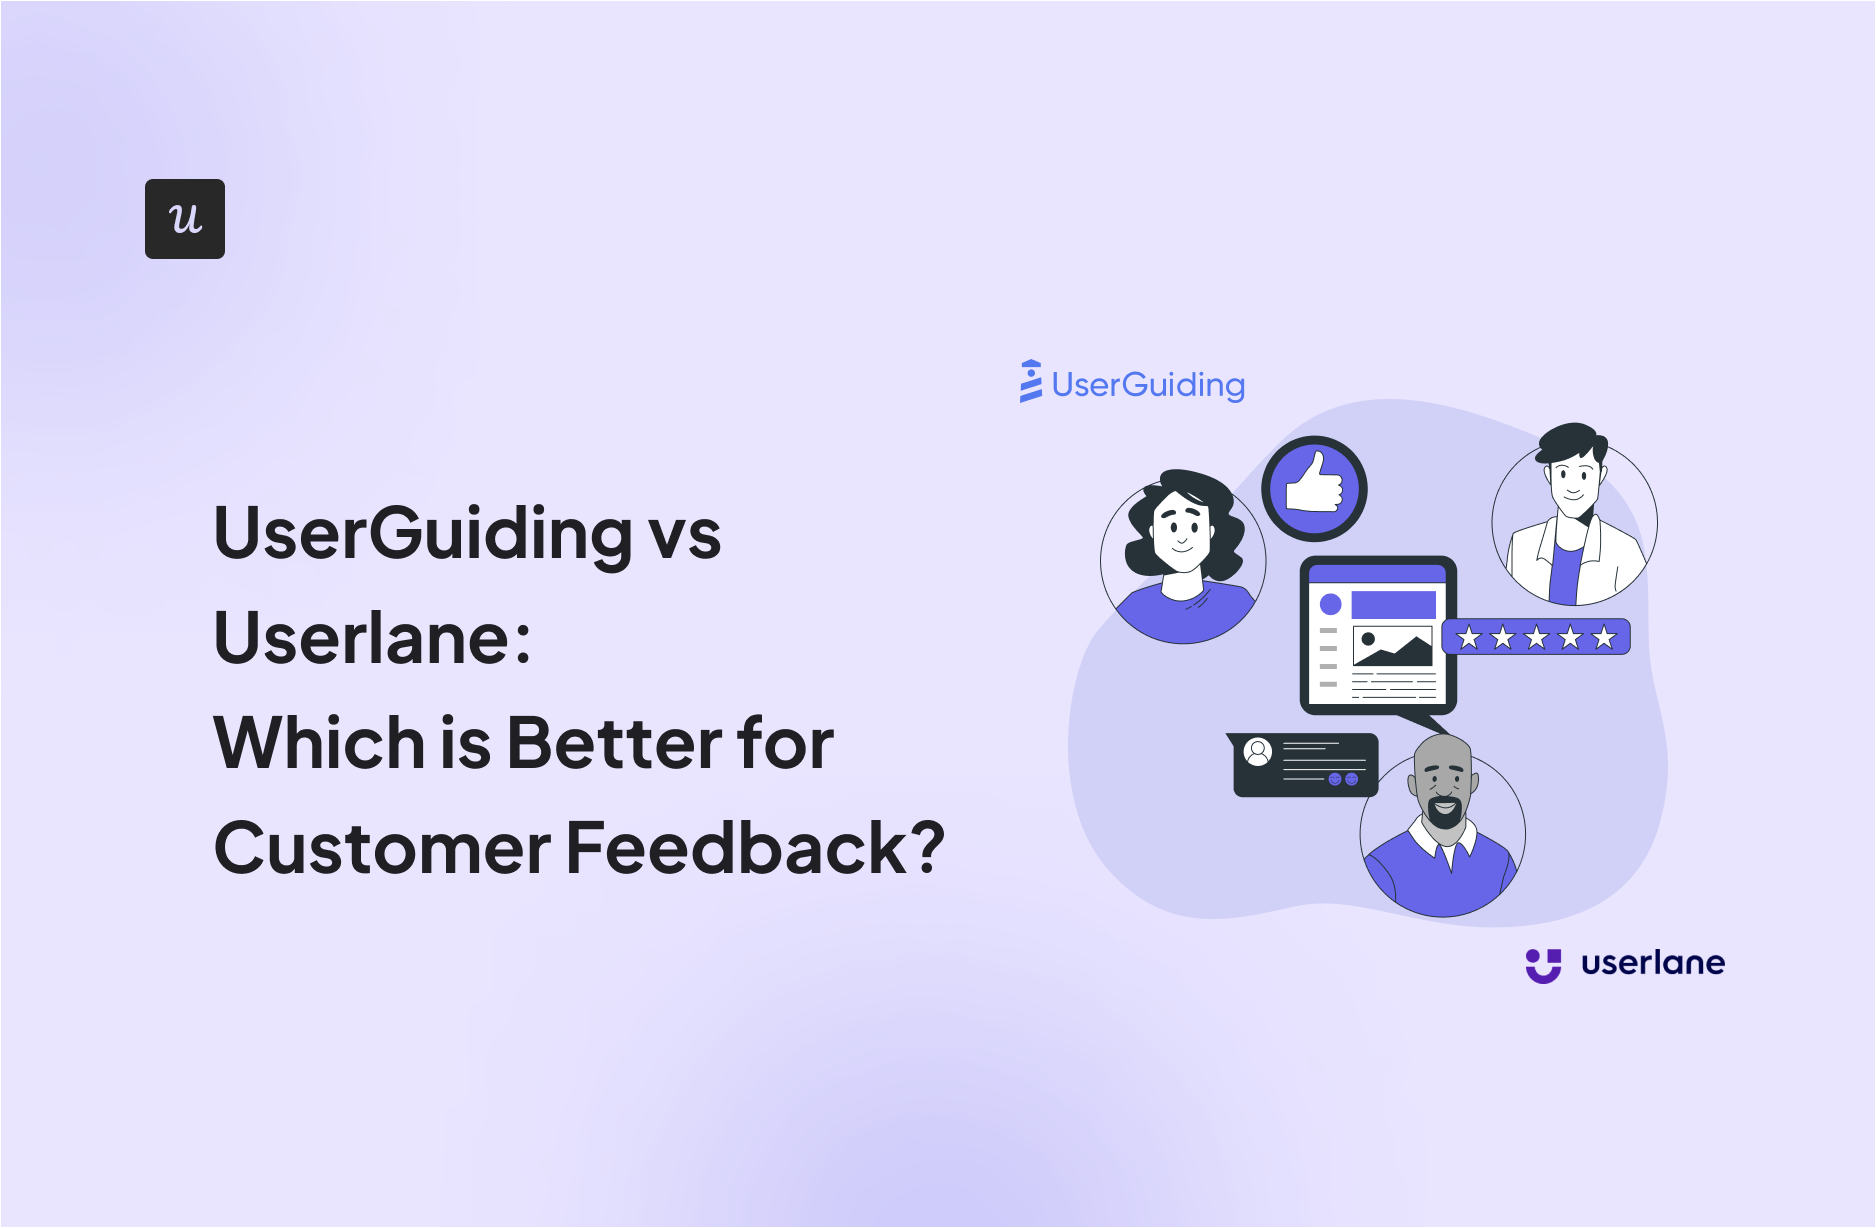 UserGuiding vs Userlane: Which is Better for Customer Feedback?